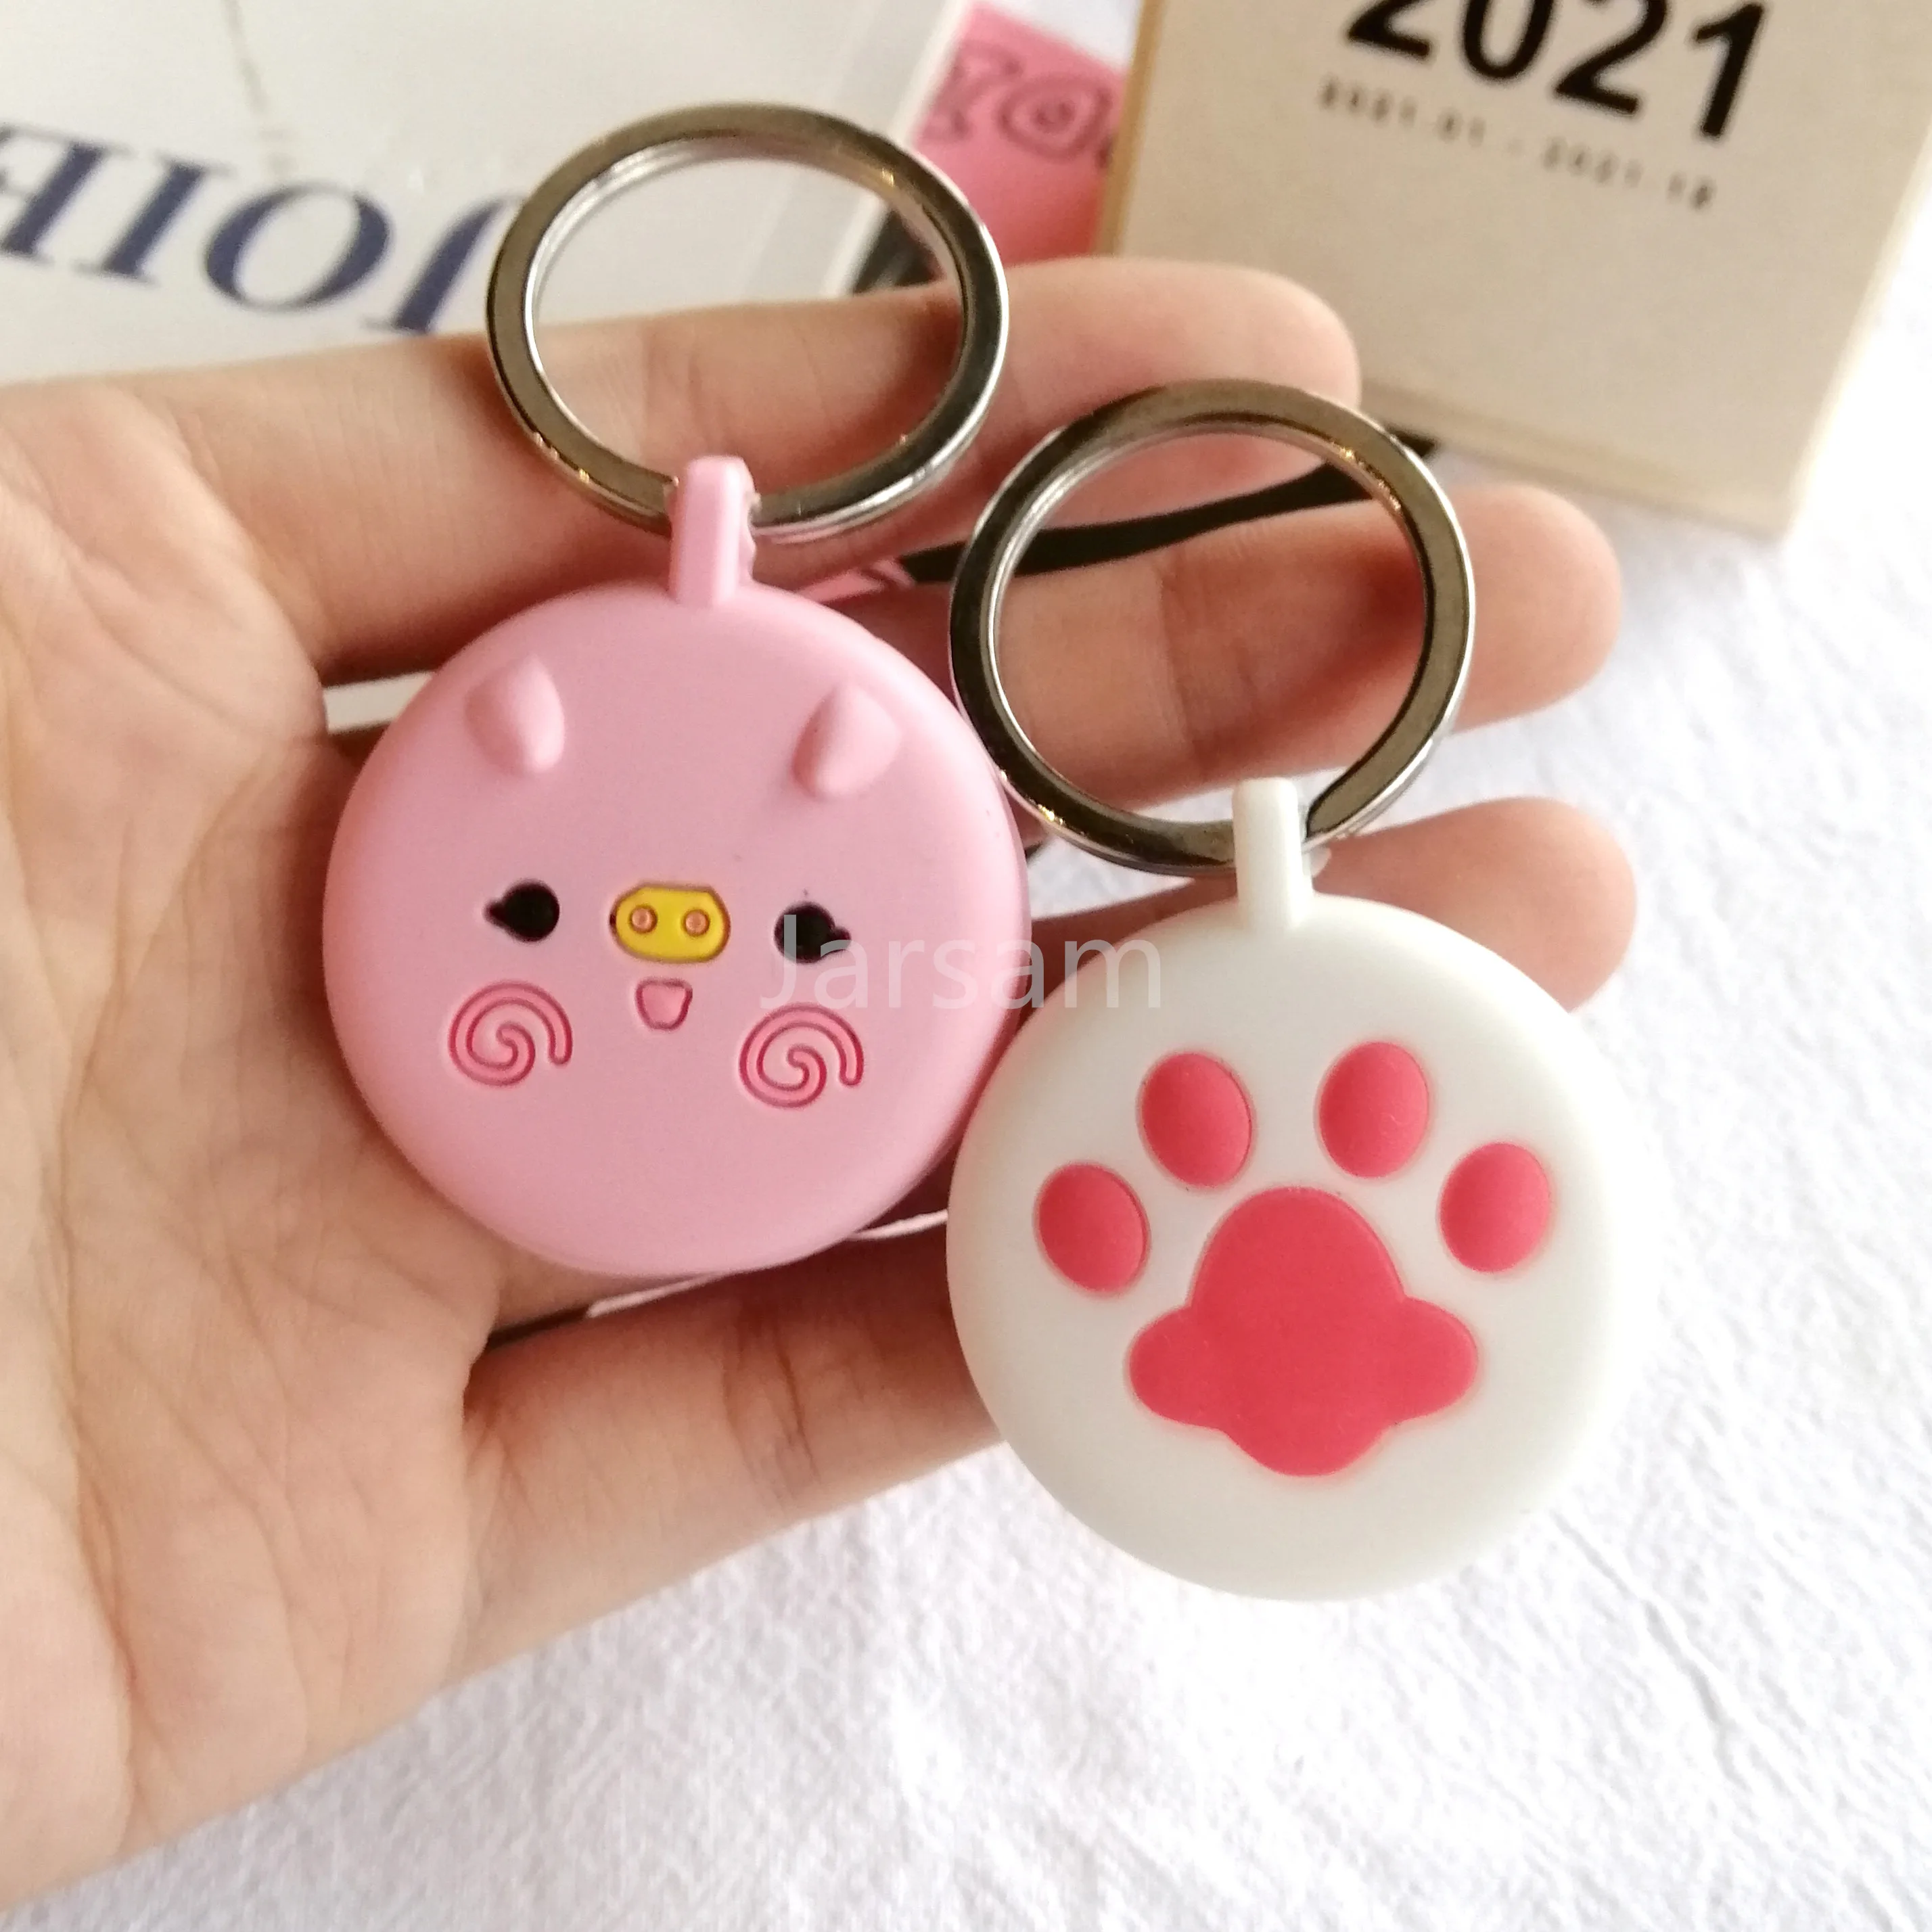 

Cartoon Case For Airtag Case Silicon Cute Cat Locator Tracker Protective Sleeve Cover For Airtags Keychain Protection Cove